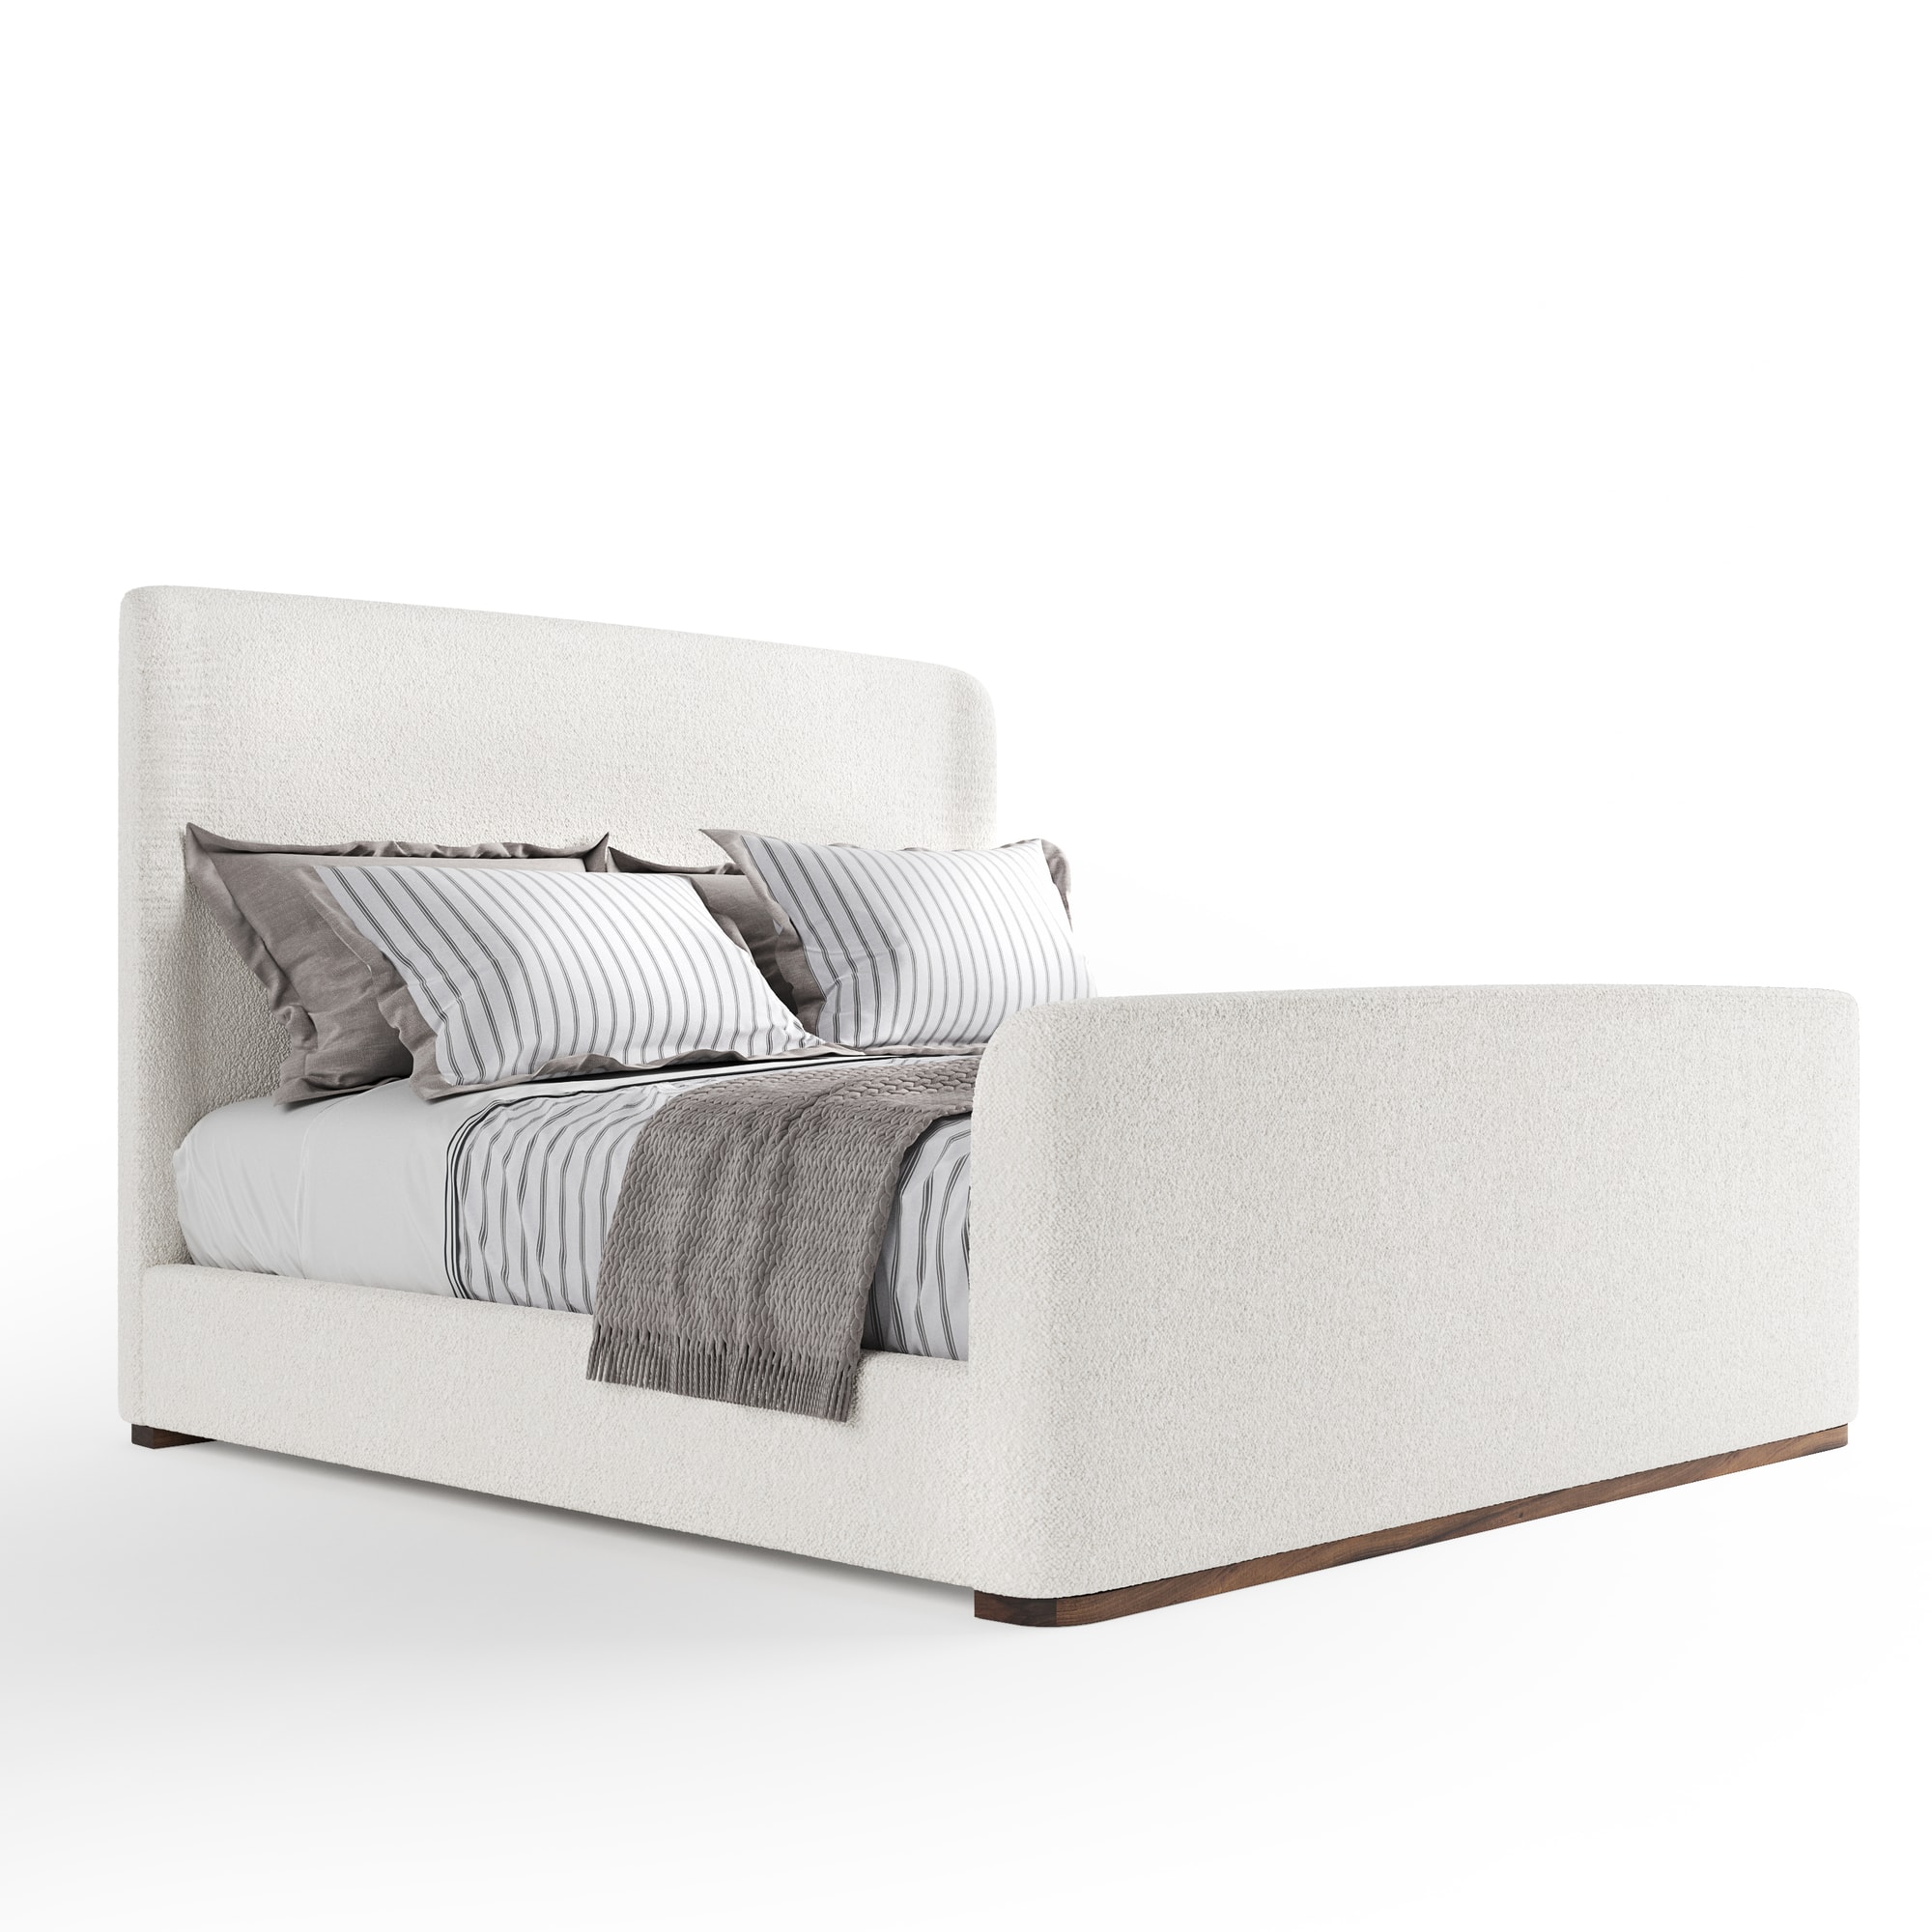 Avery King Bed White